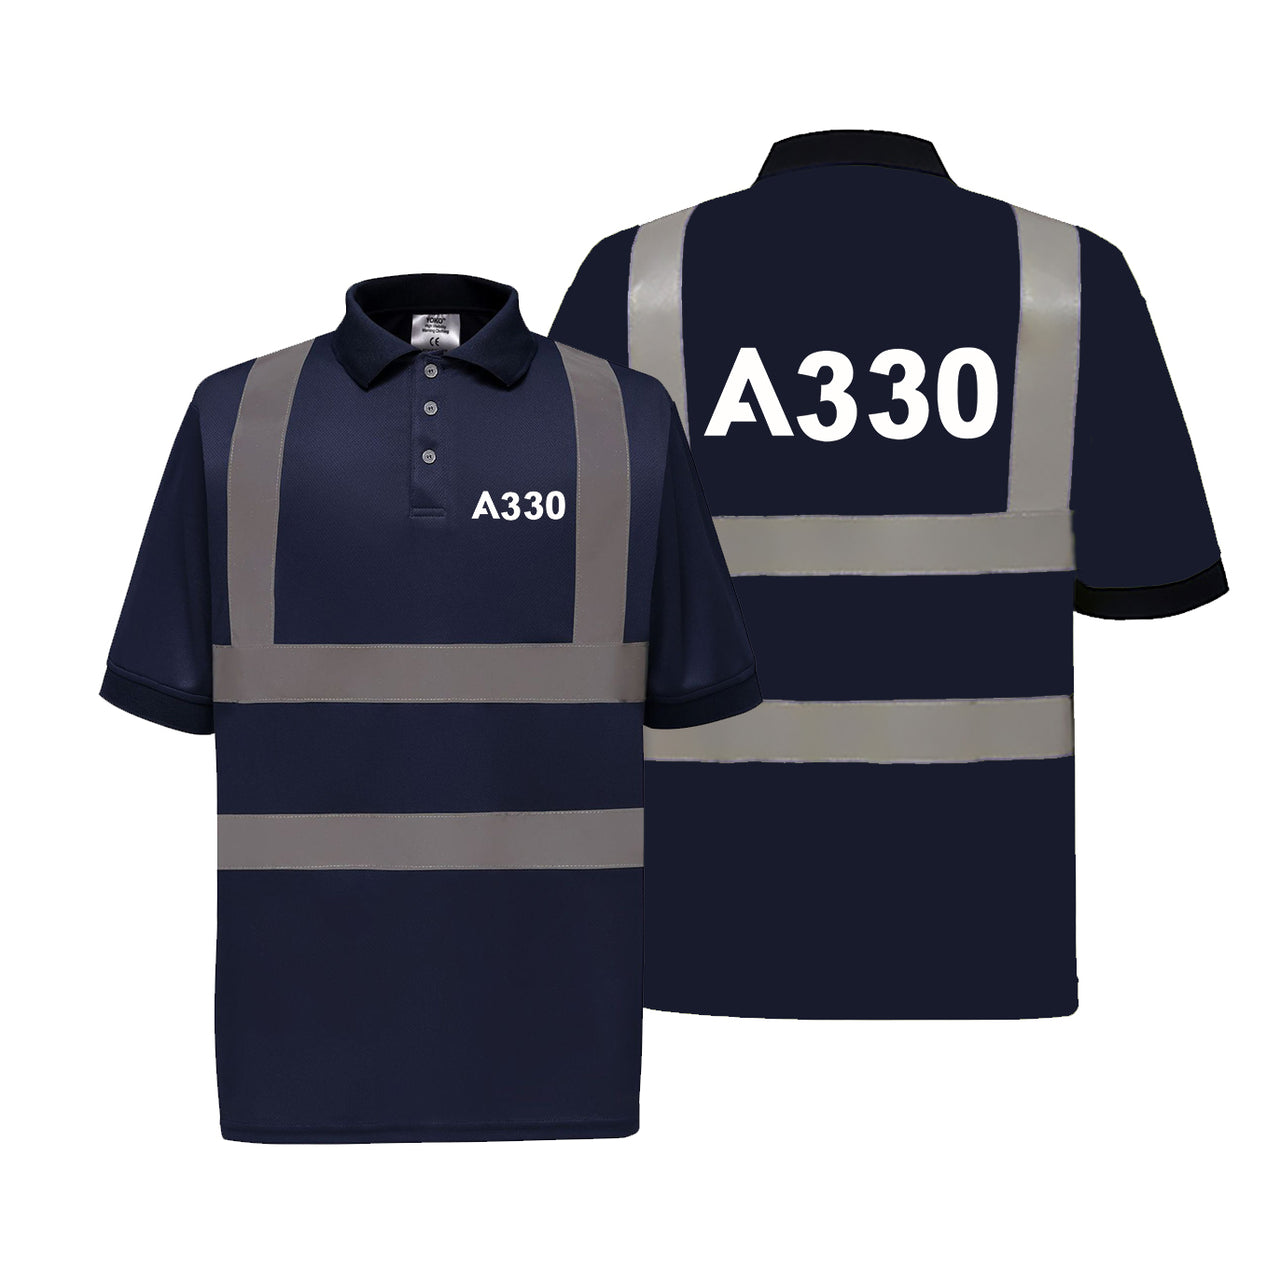 A330 Flat Text Designed Reflective Polo T-Shirts